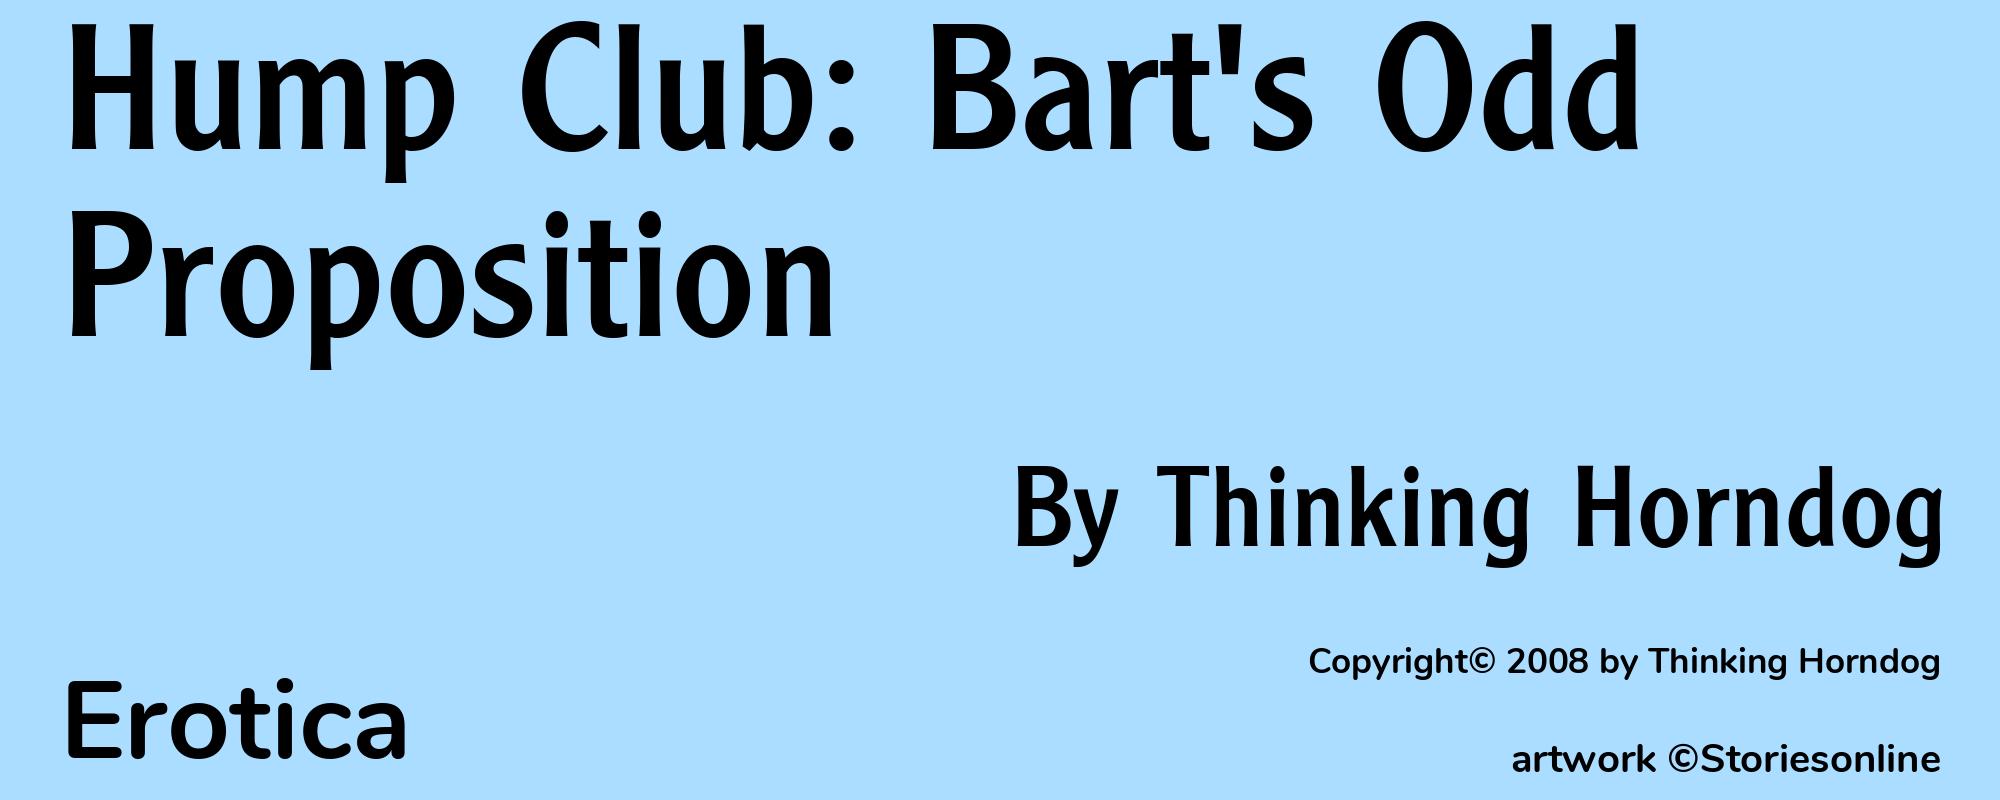 Hump Club: Bart's Odd Proposition - Cover